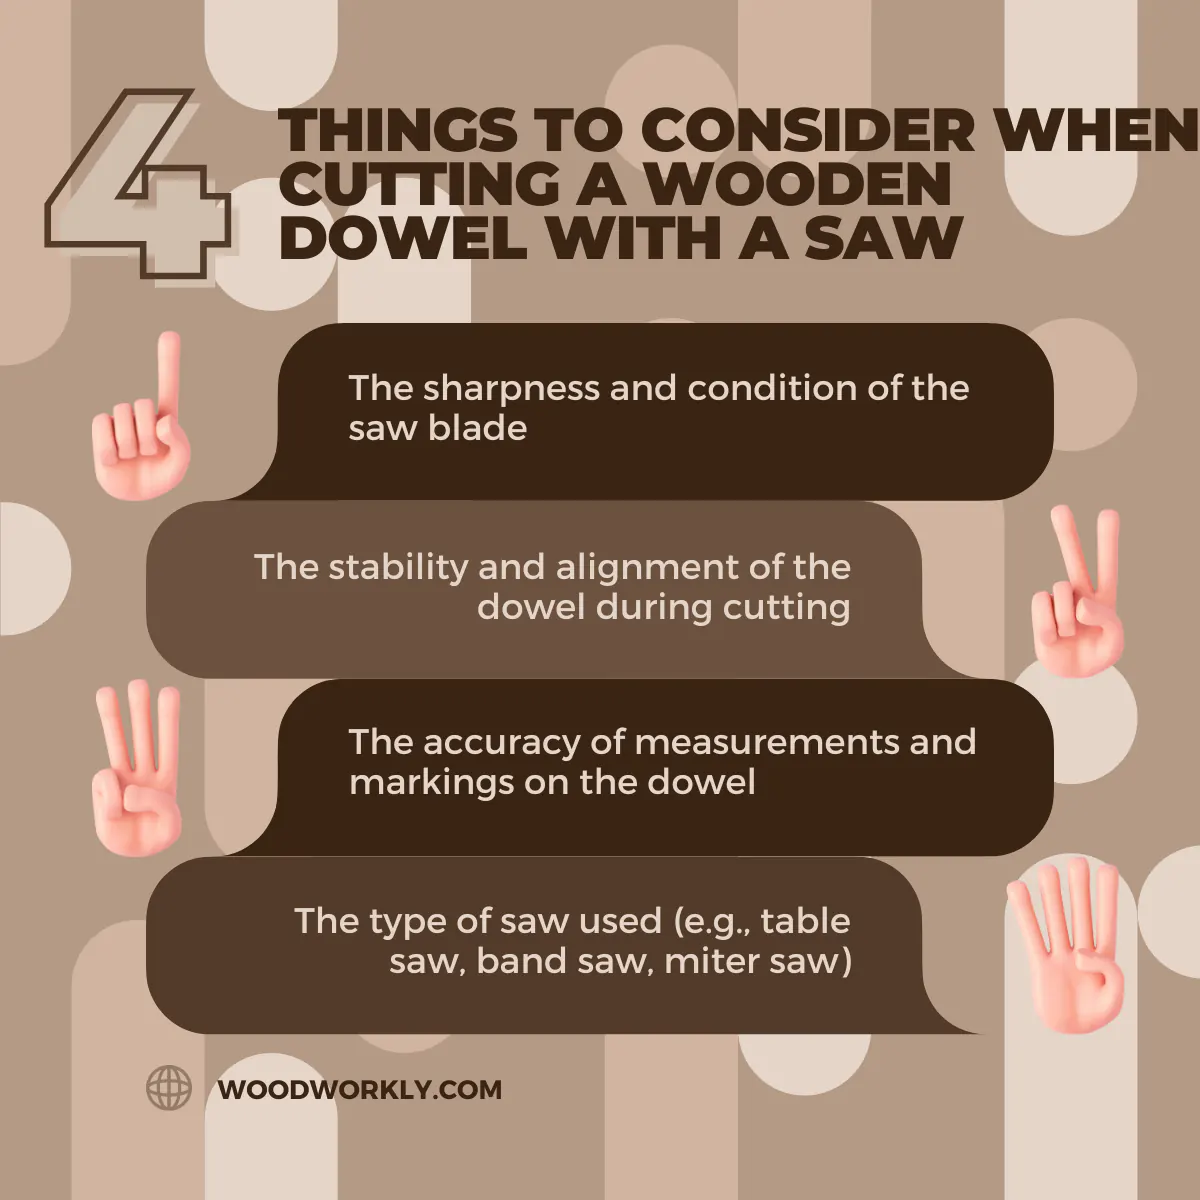 Things to consider when cutting a wooden dowel with a saw